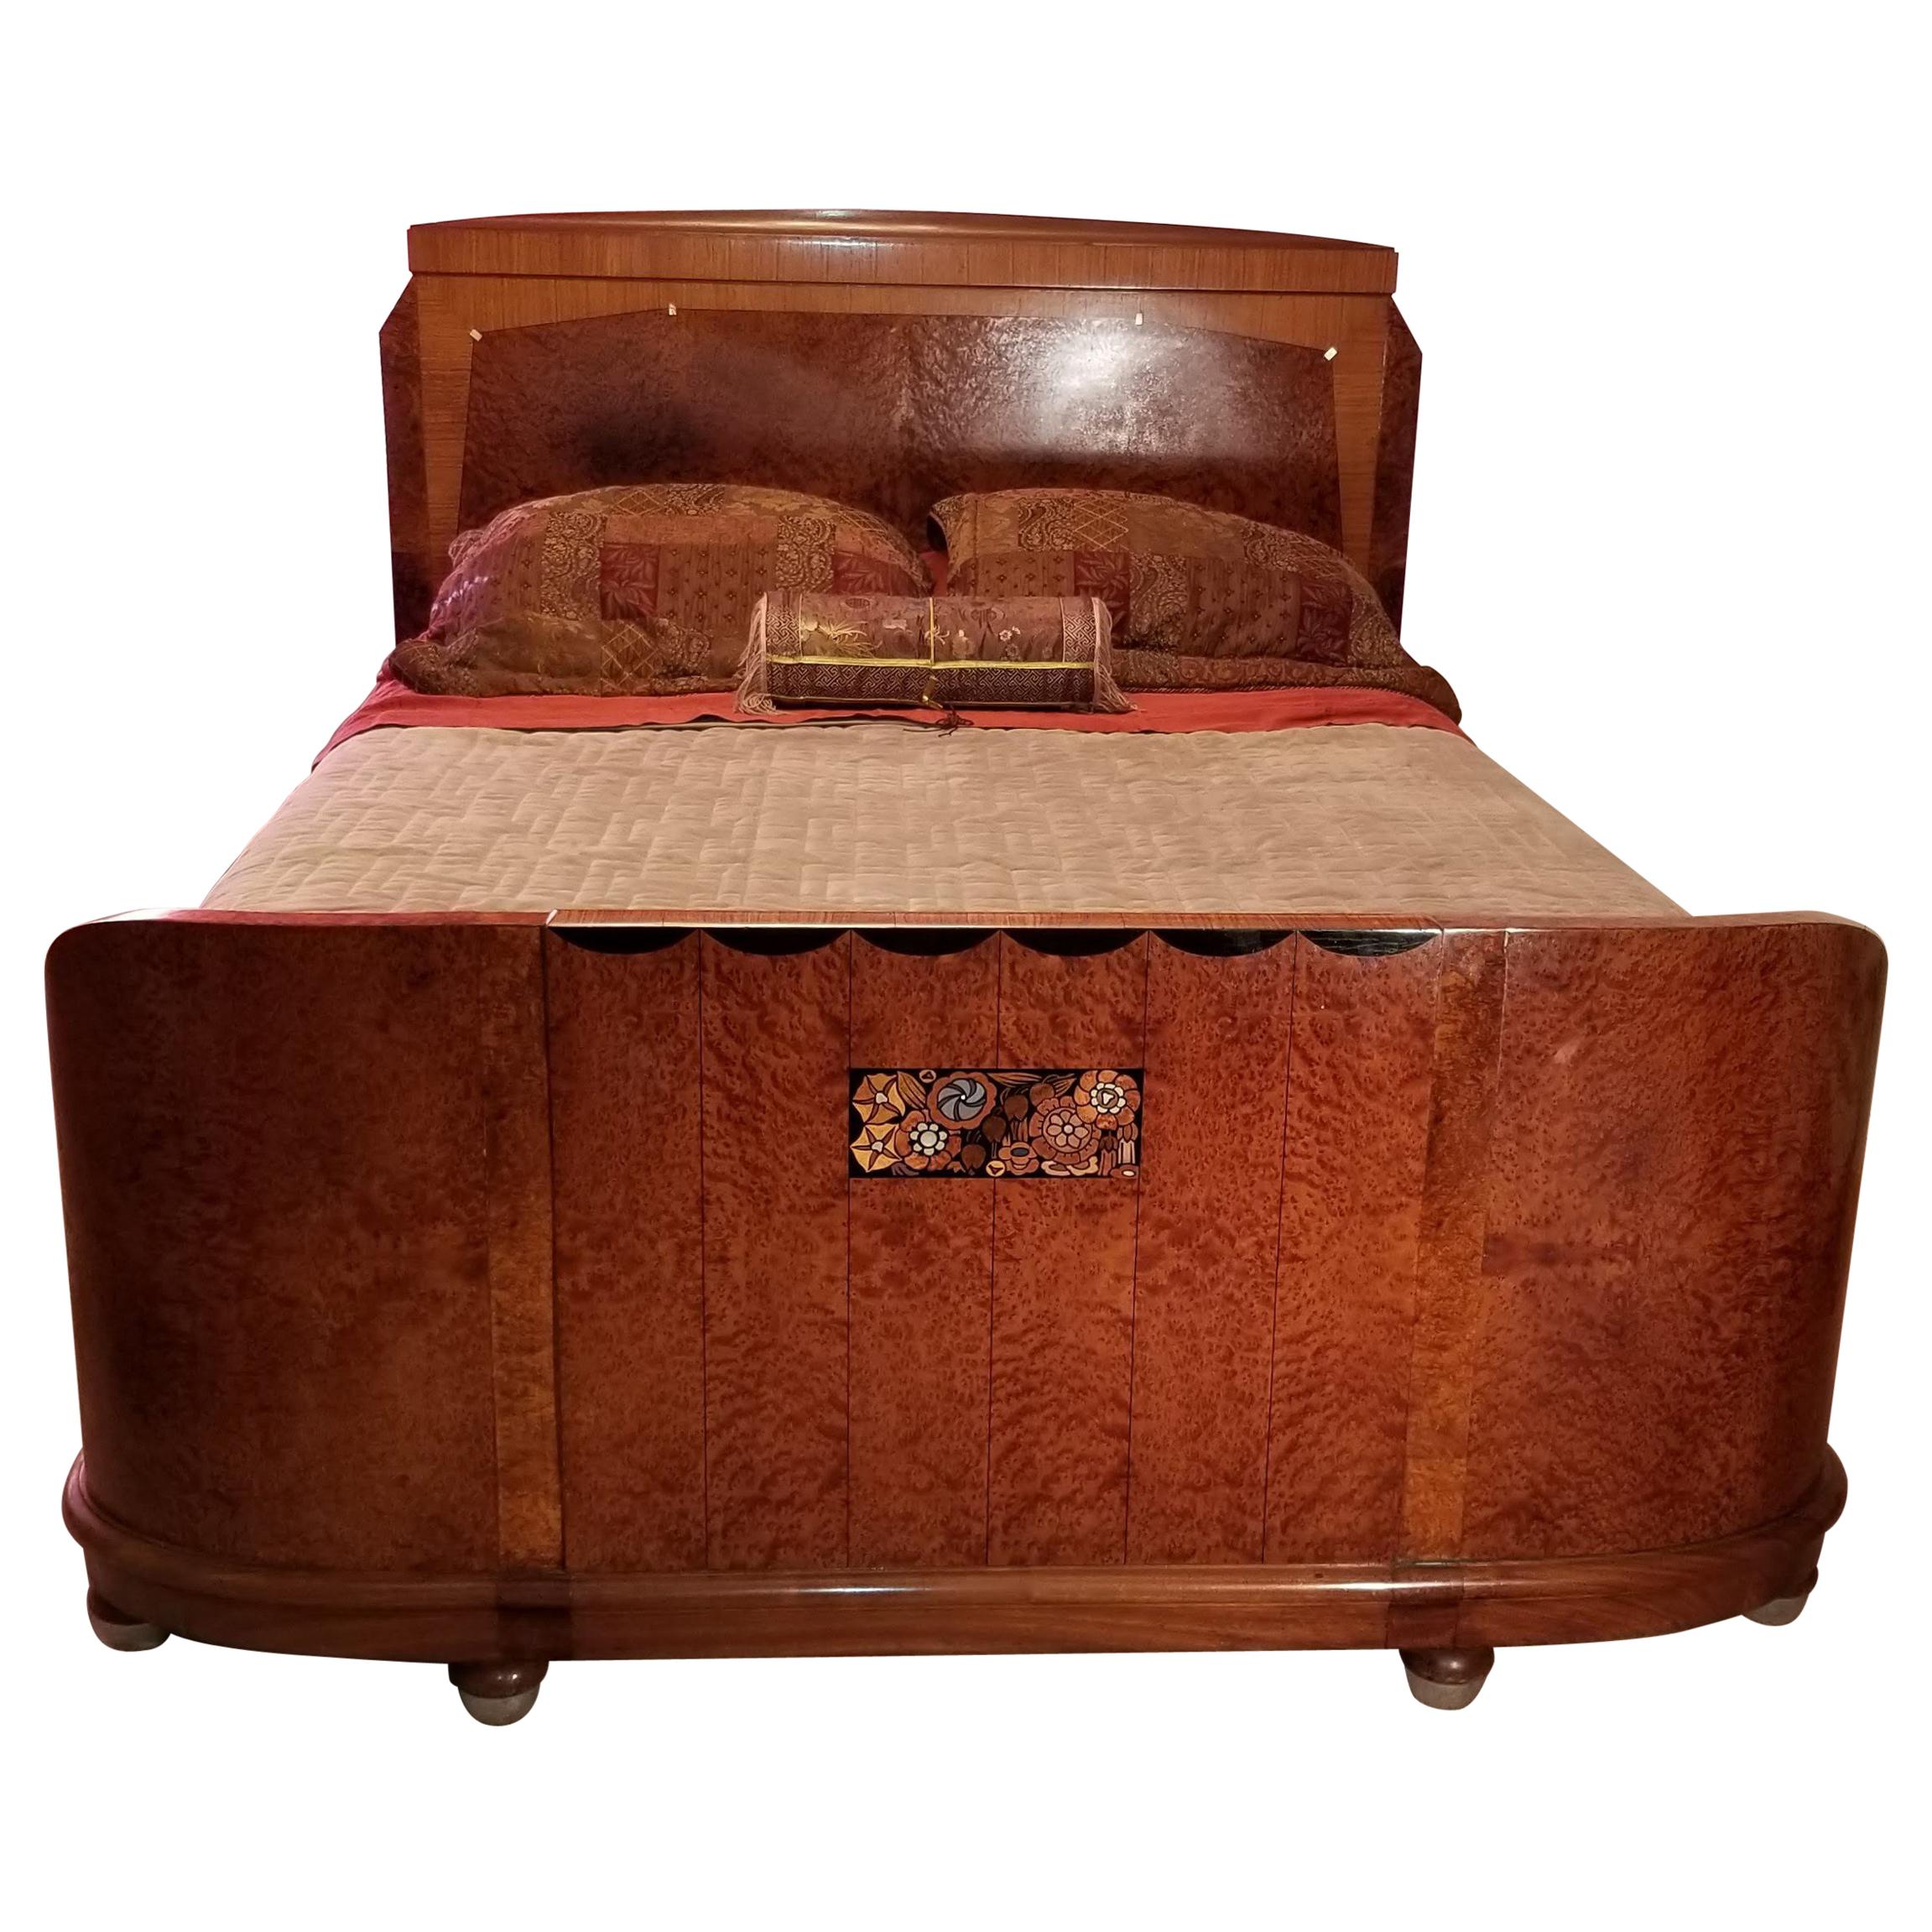 French Art Deco Queen Size Inlaid Thuya Wood Bed, Attributed to Maurice Dufrène